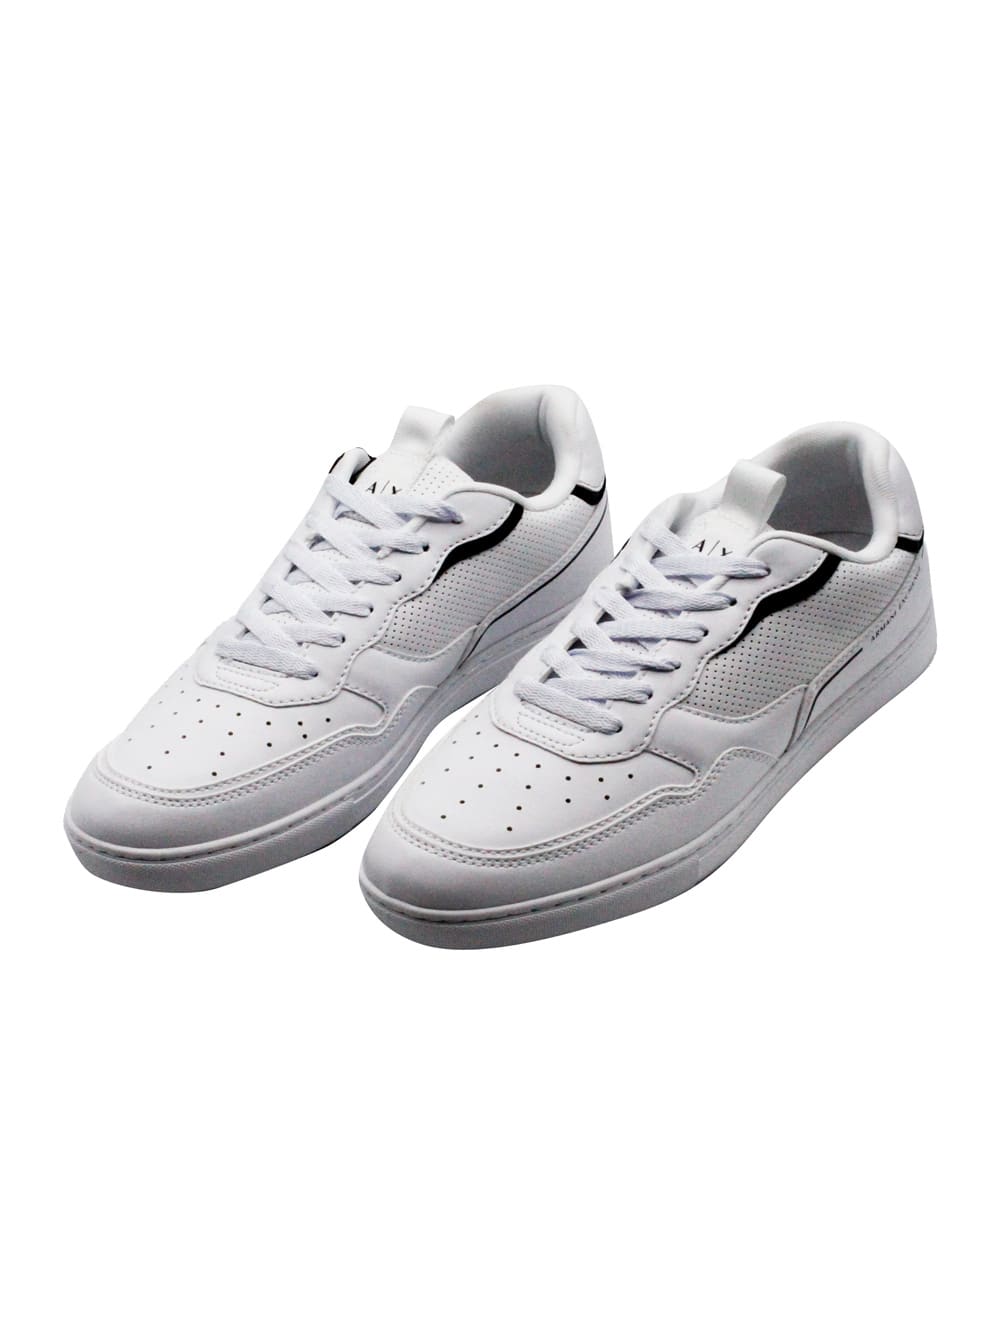 Sneakers In Soft Perforated Leather With Matching Sole And Lace Closure. Rear Logo